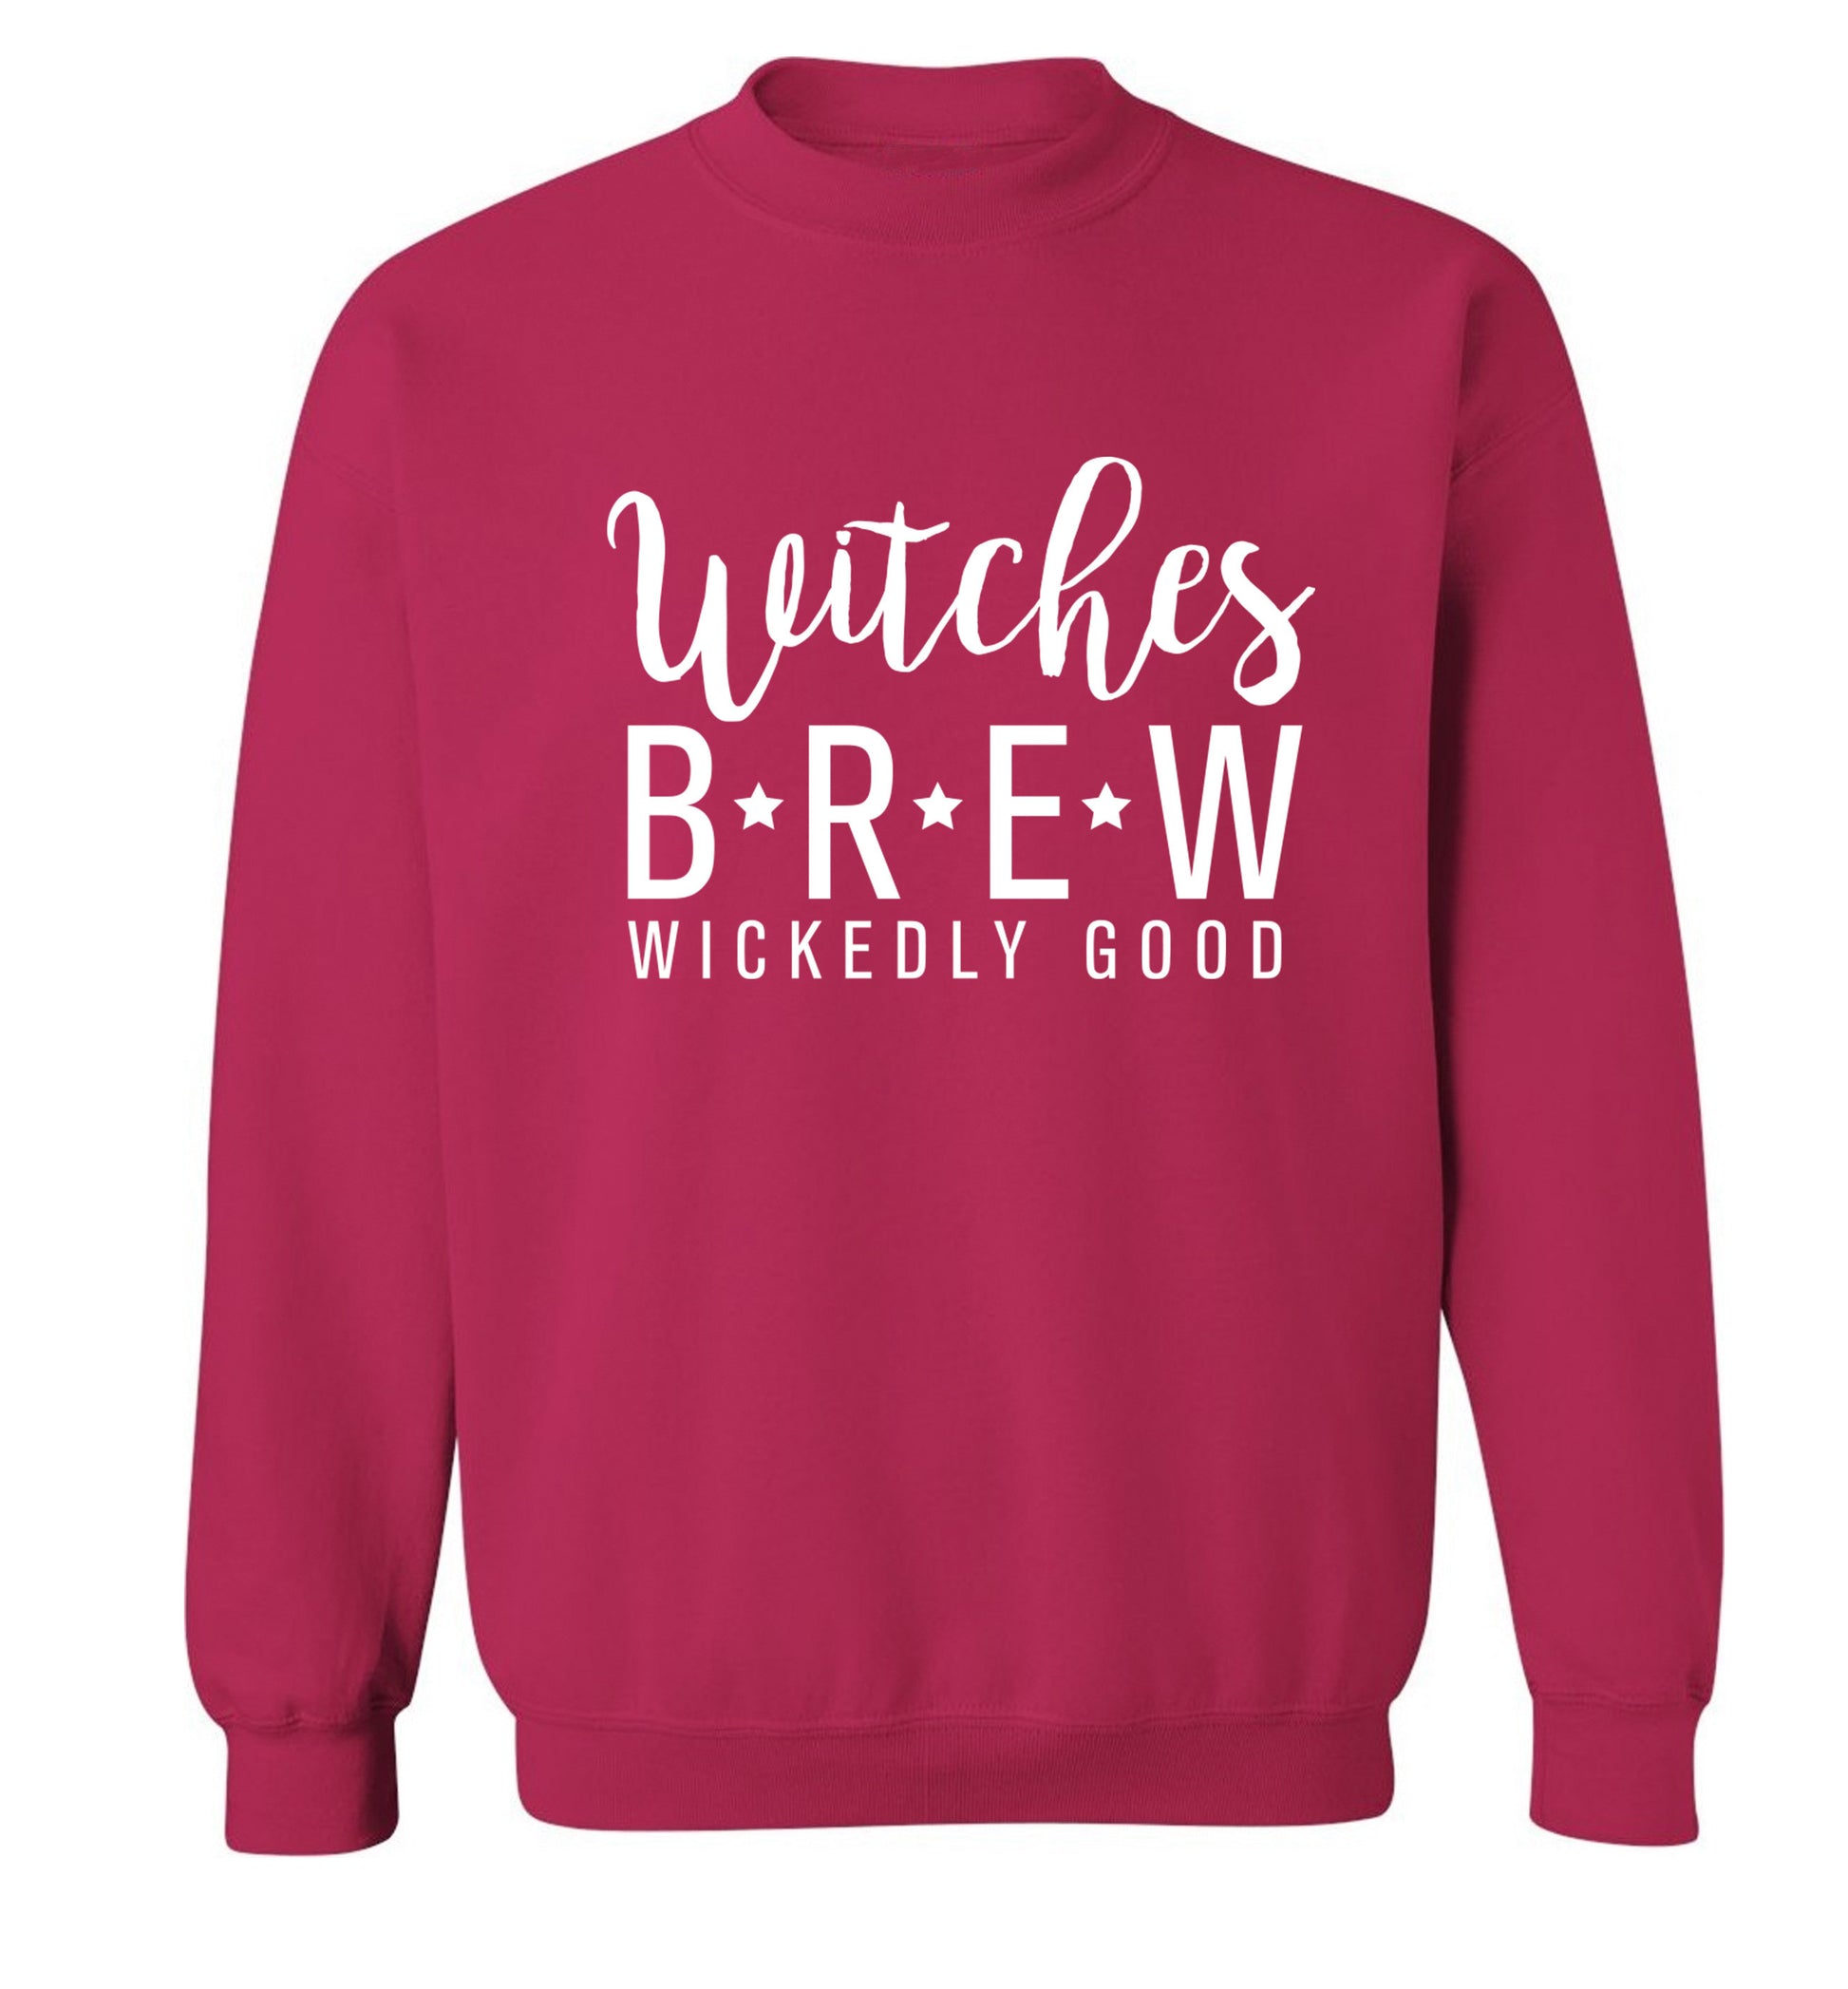 Witches Brew wickedly good Adult's unisex pink Sweater 2XL